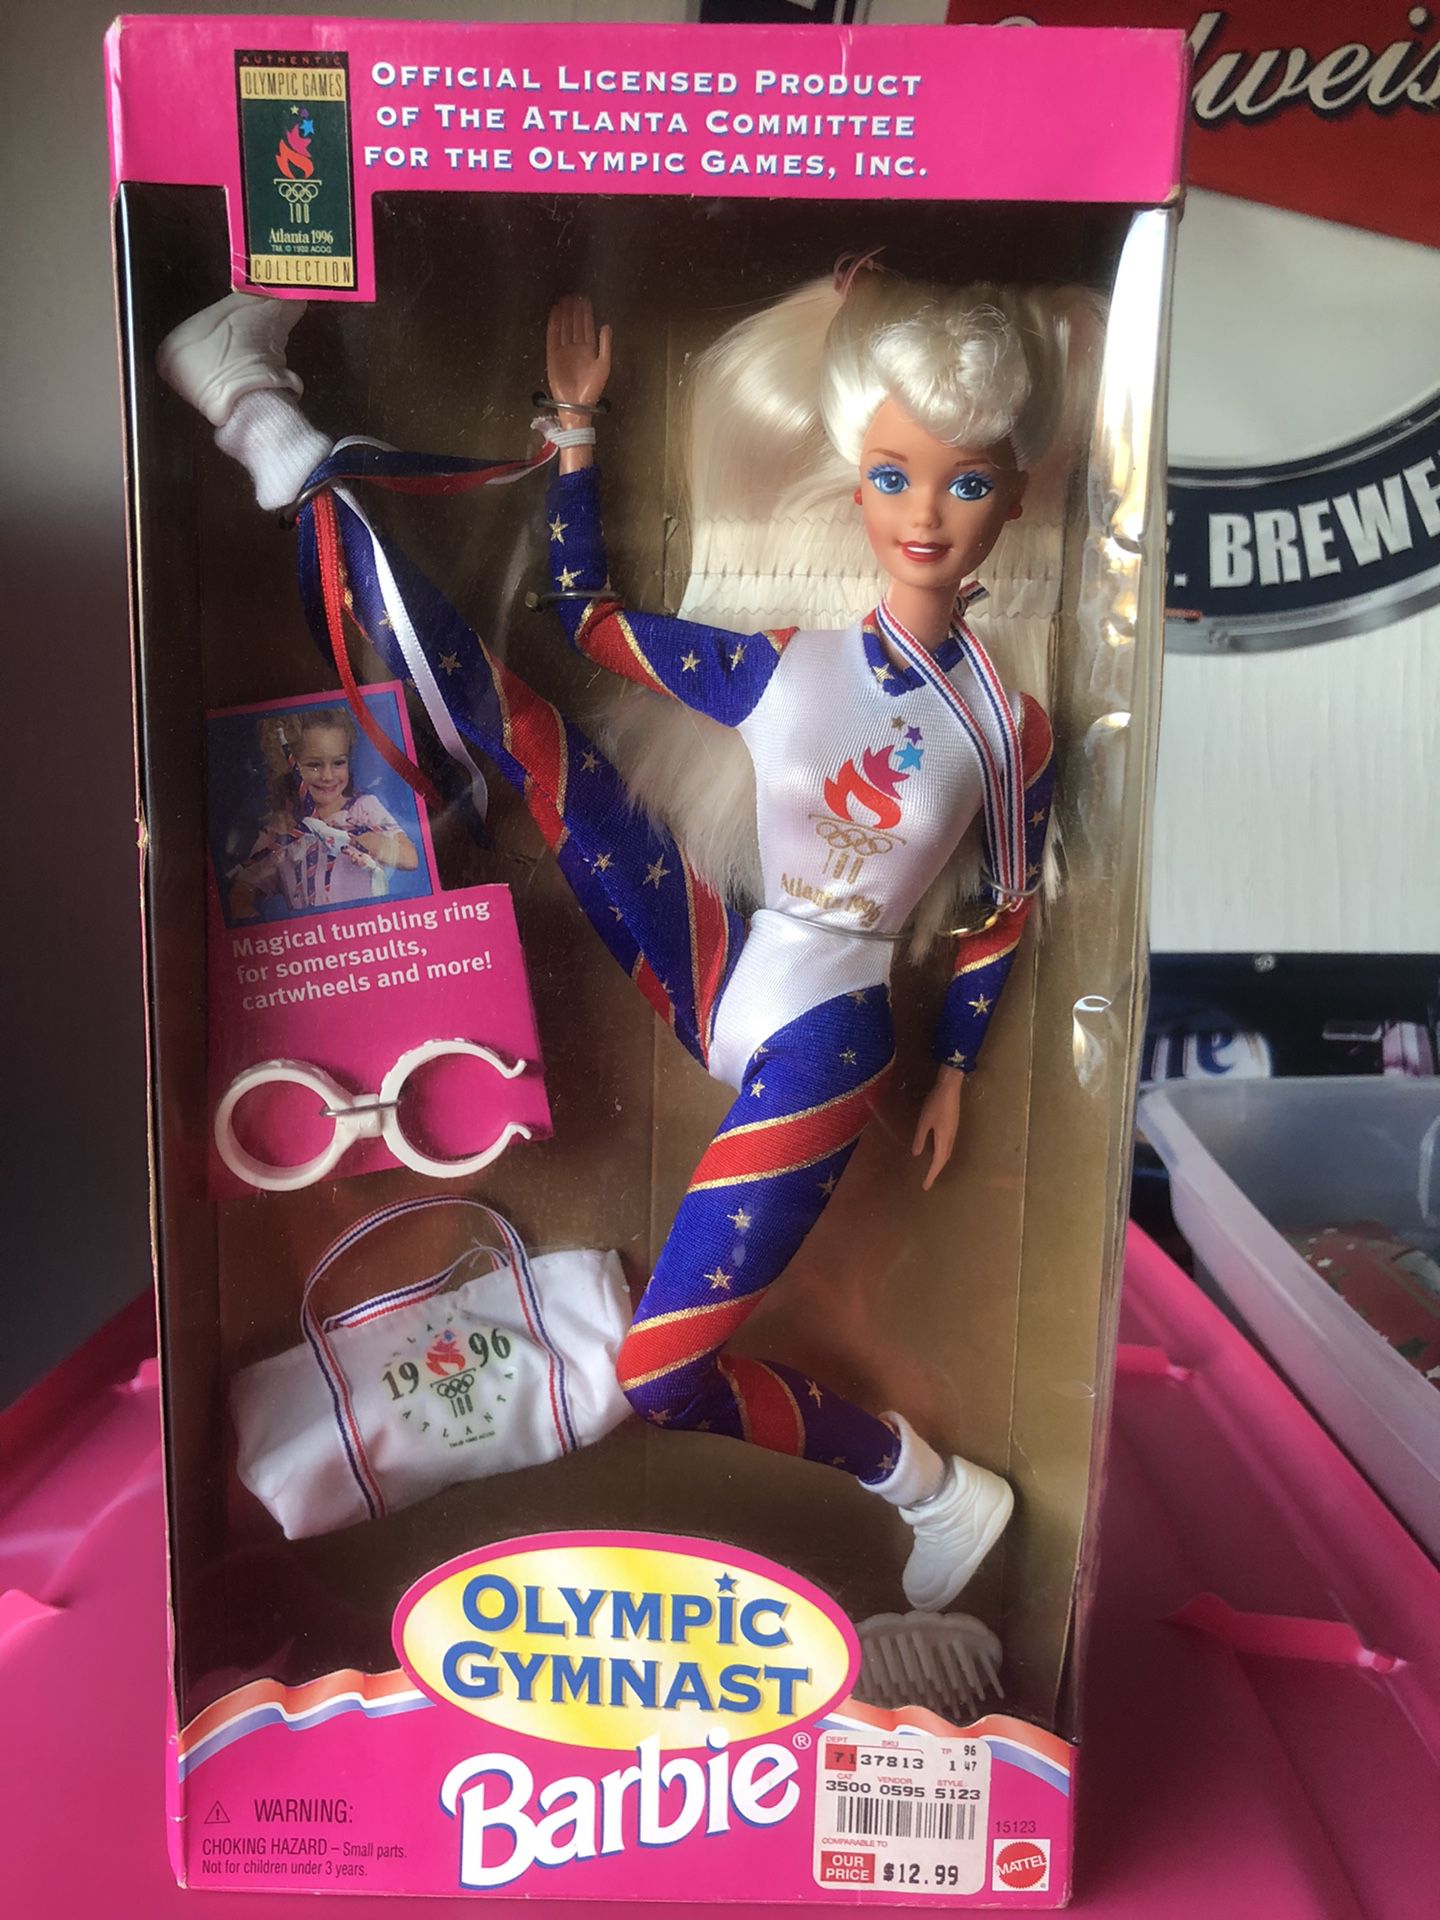 Vintage 1996 Atlanta Olympic Gymnast Barbie in Original Box by Mattel, Never Used, Collectible Barbie